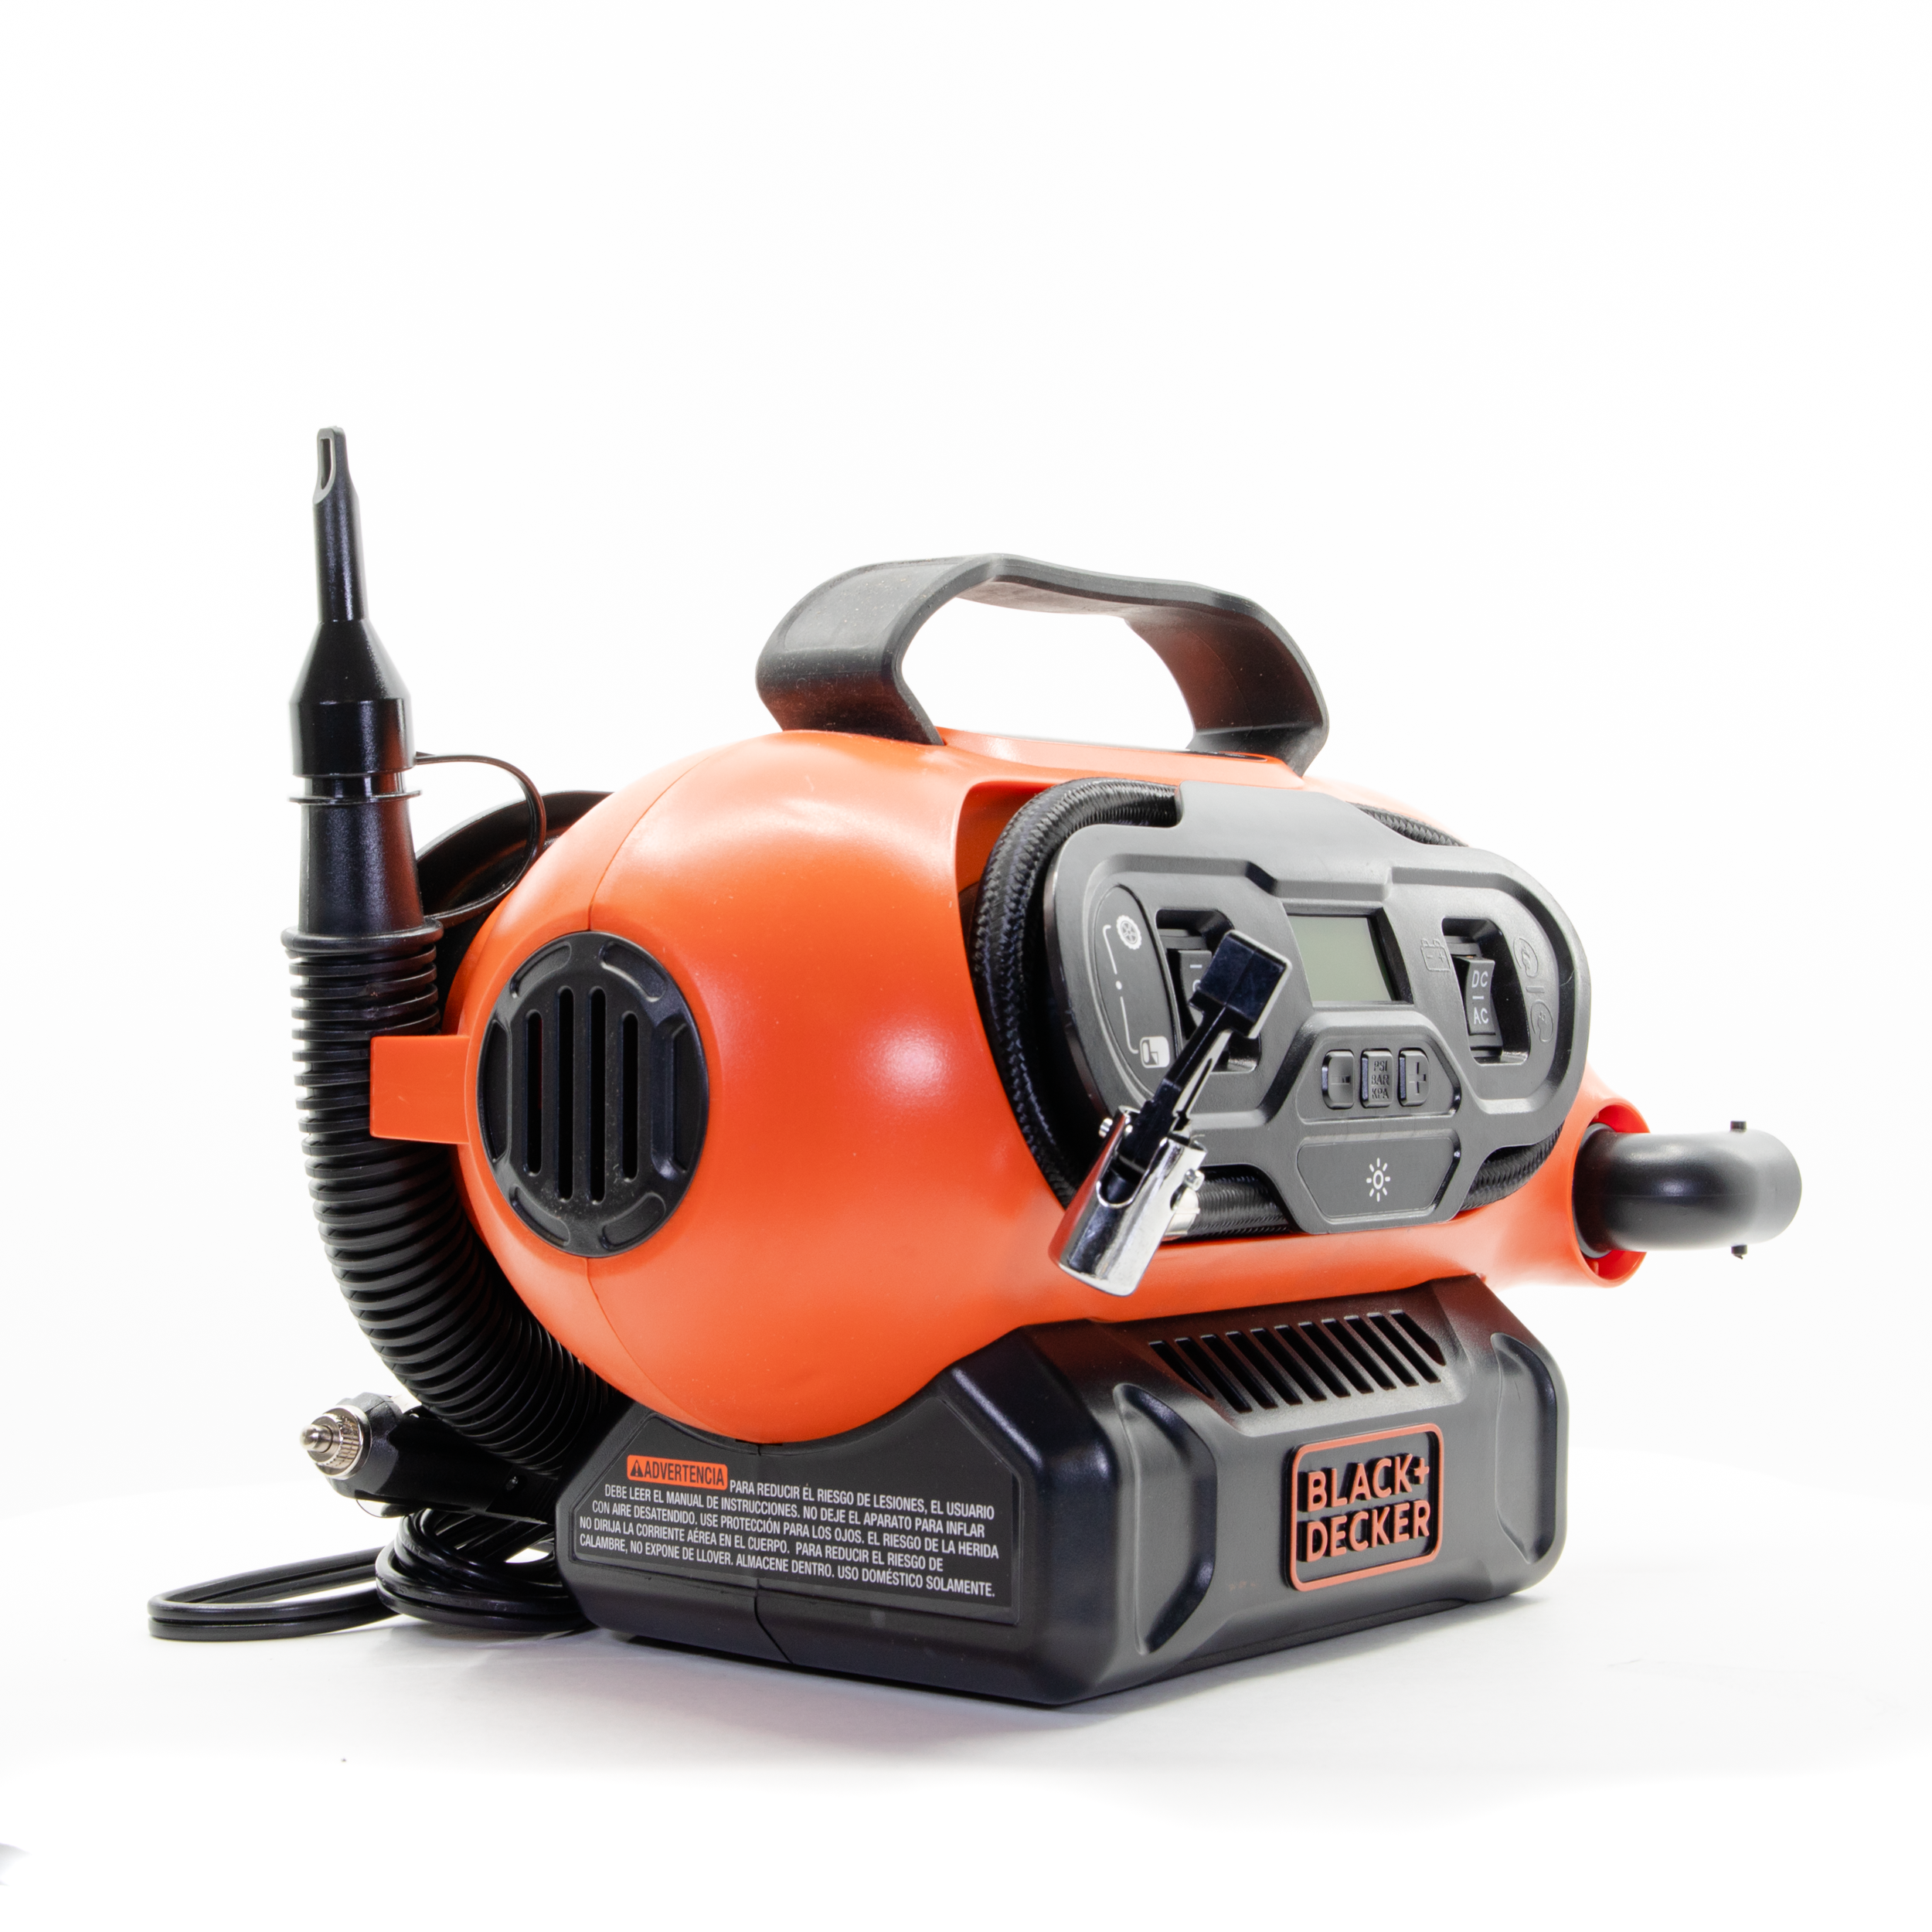  BLACK+DECKER BDINF20C 20V Lithium Cordless Multi-Purpose  Inflator (Tool Only) with BLACK+DECKER LDX120C 20V MAX Lithium Ion Drill /  Driver : Tools & Home Improvement